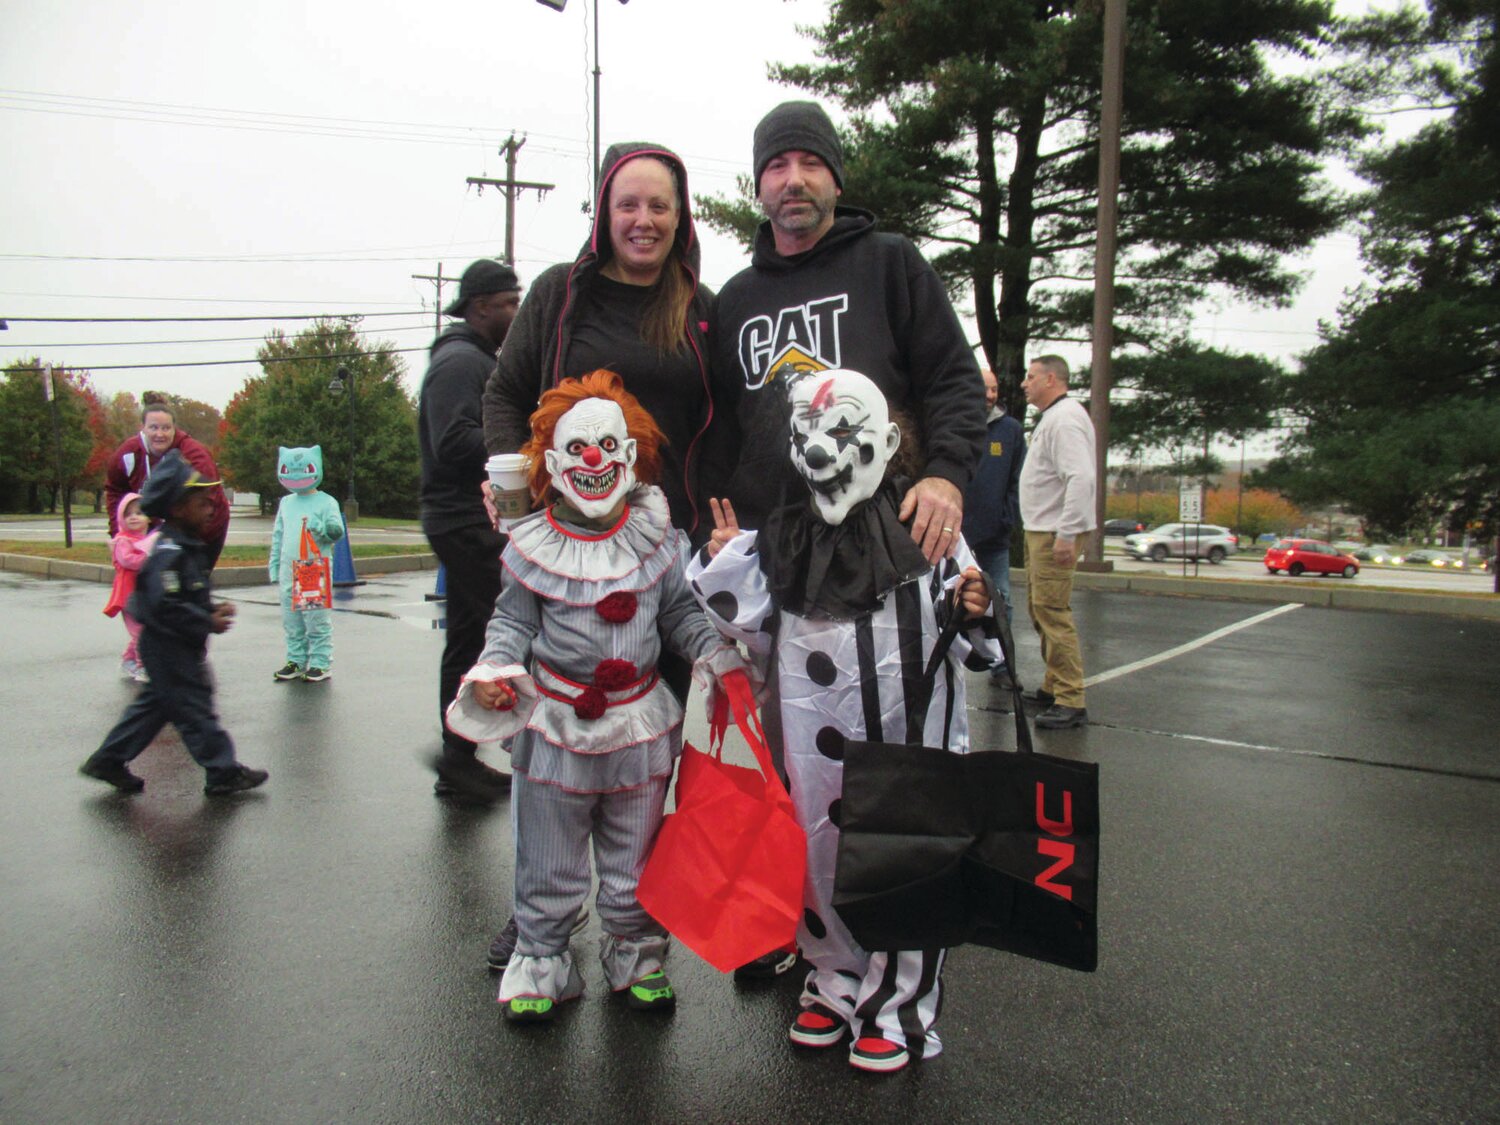 SPOOKY SORTS: Heather and Joe Bannon are among the many grandparents who brought their grandchildren Giod and Llijah Manuppelli-Mirabella to the JPD’s 3rd Annual Turn or Treat.